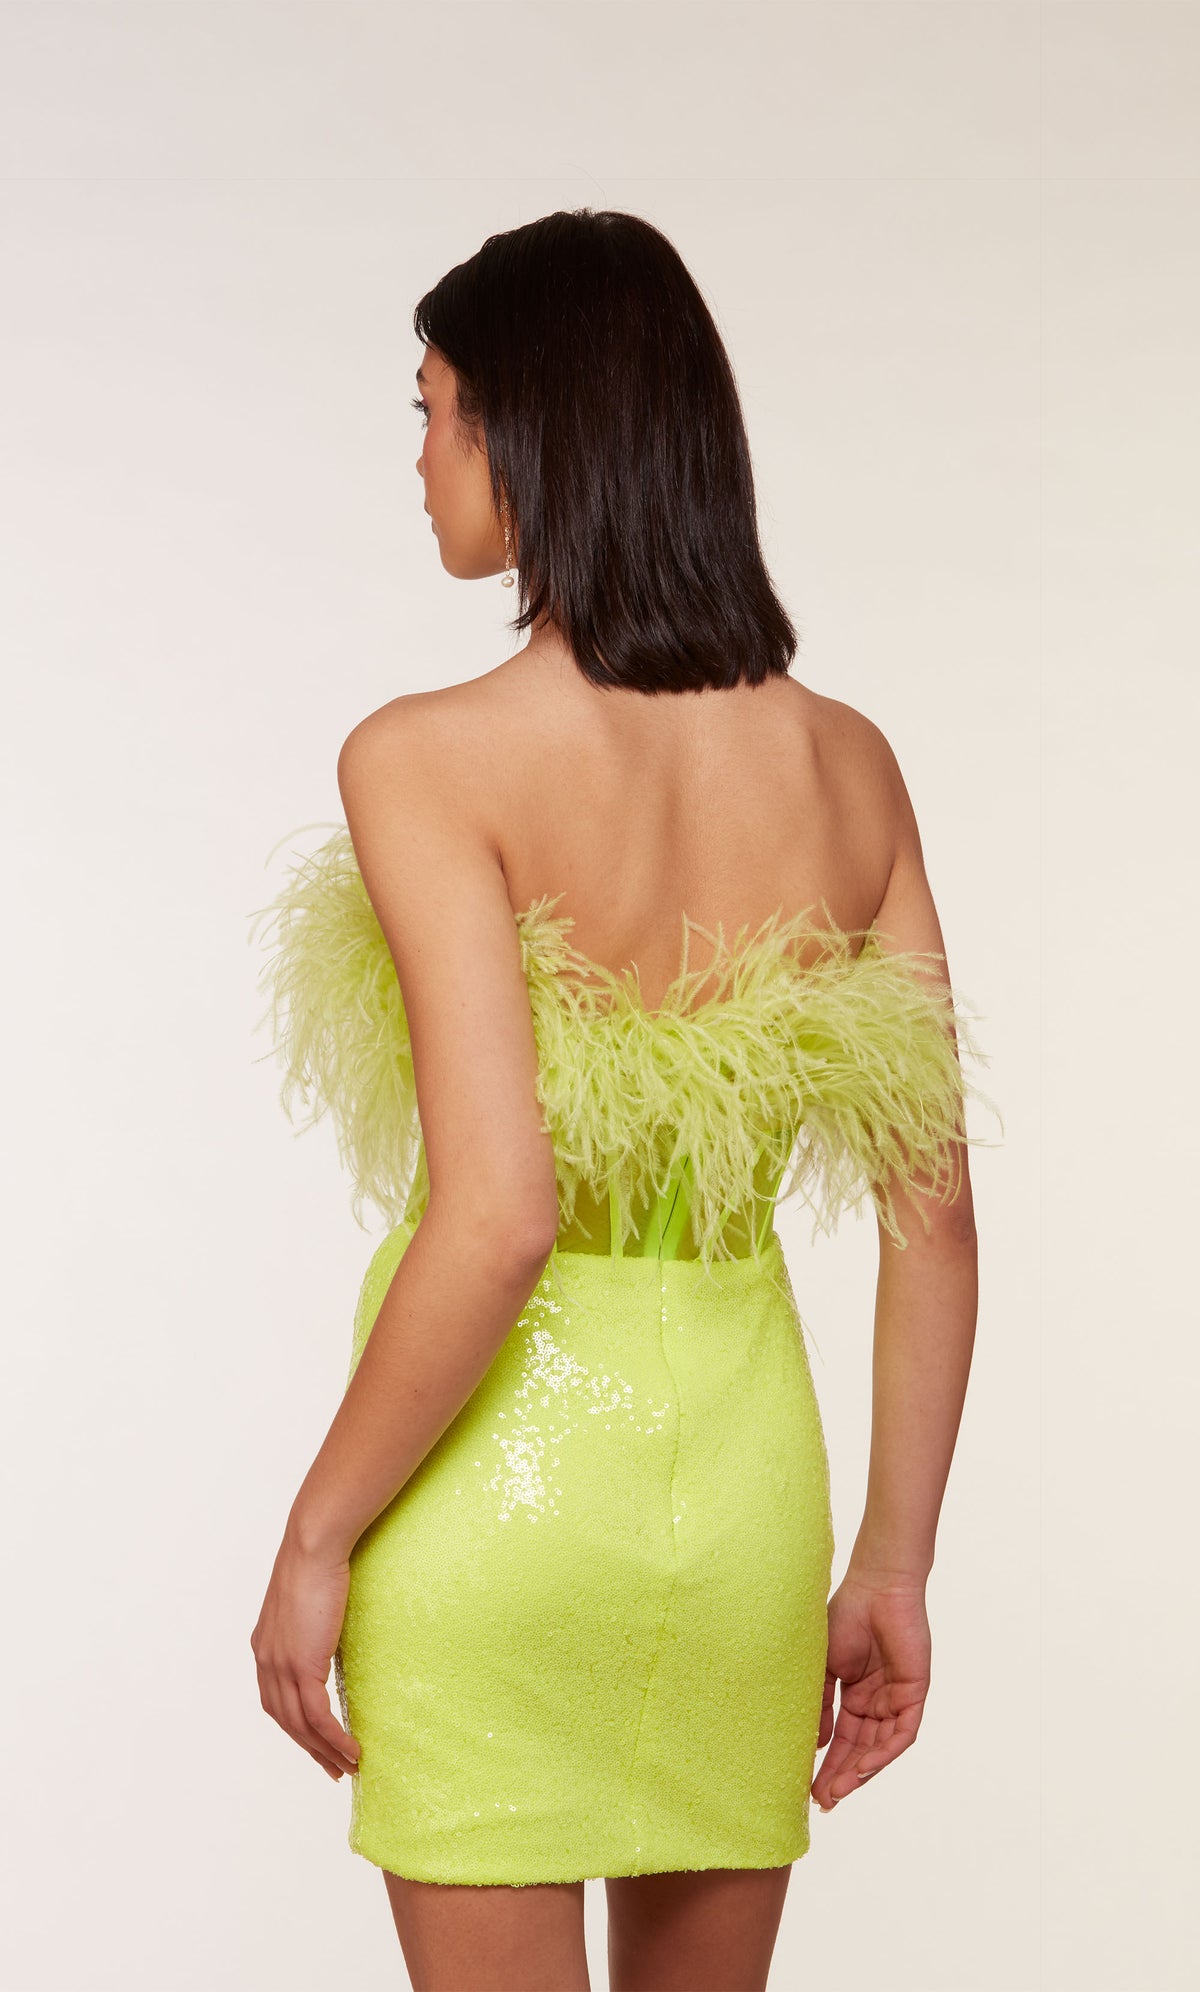 A chic, feather dress with a strapless corset bodice with a zip-up back and fitted sequin skirt in neon yellow.